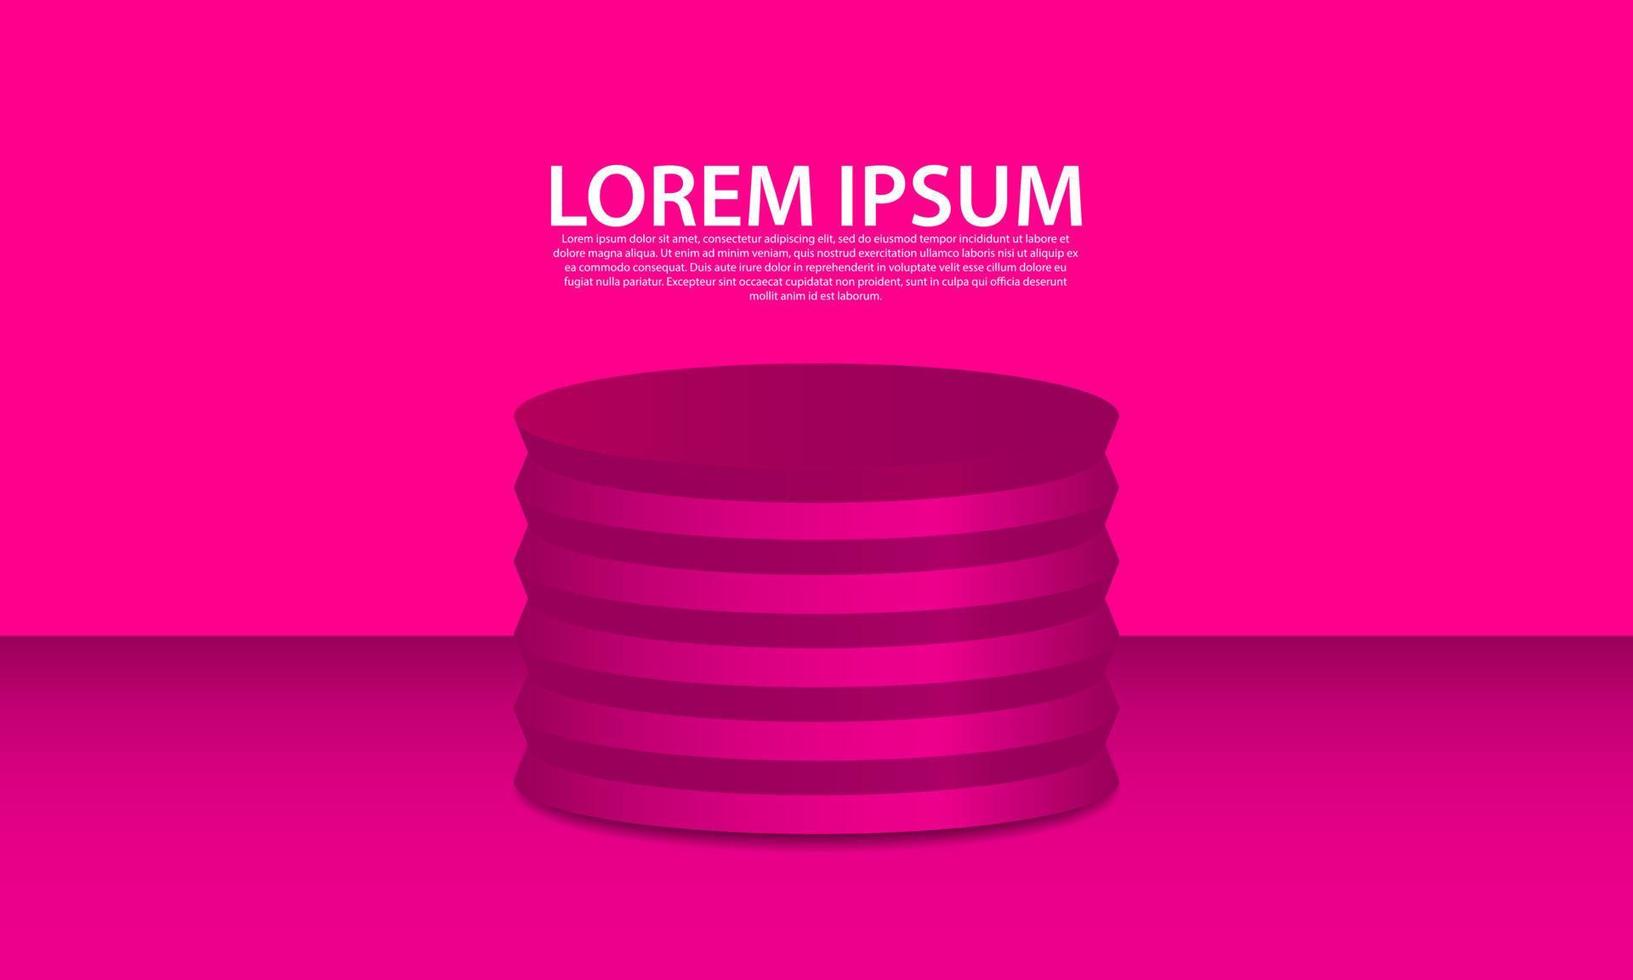 podium background  for products and advertisements vector